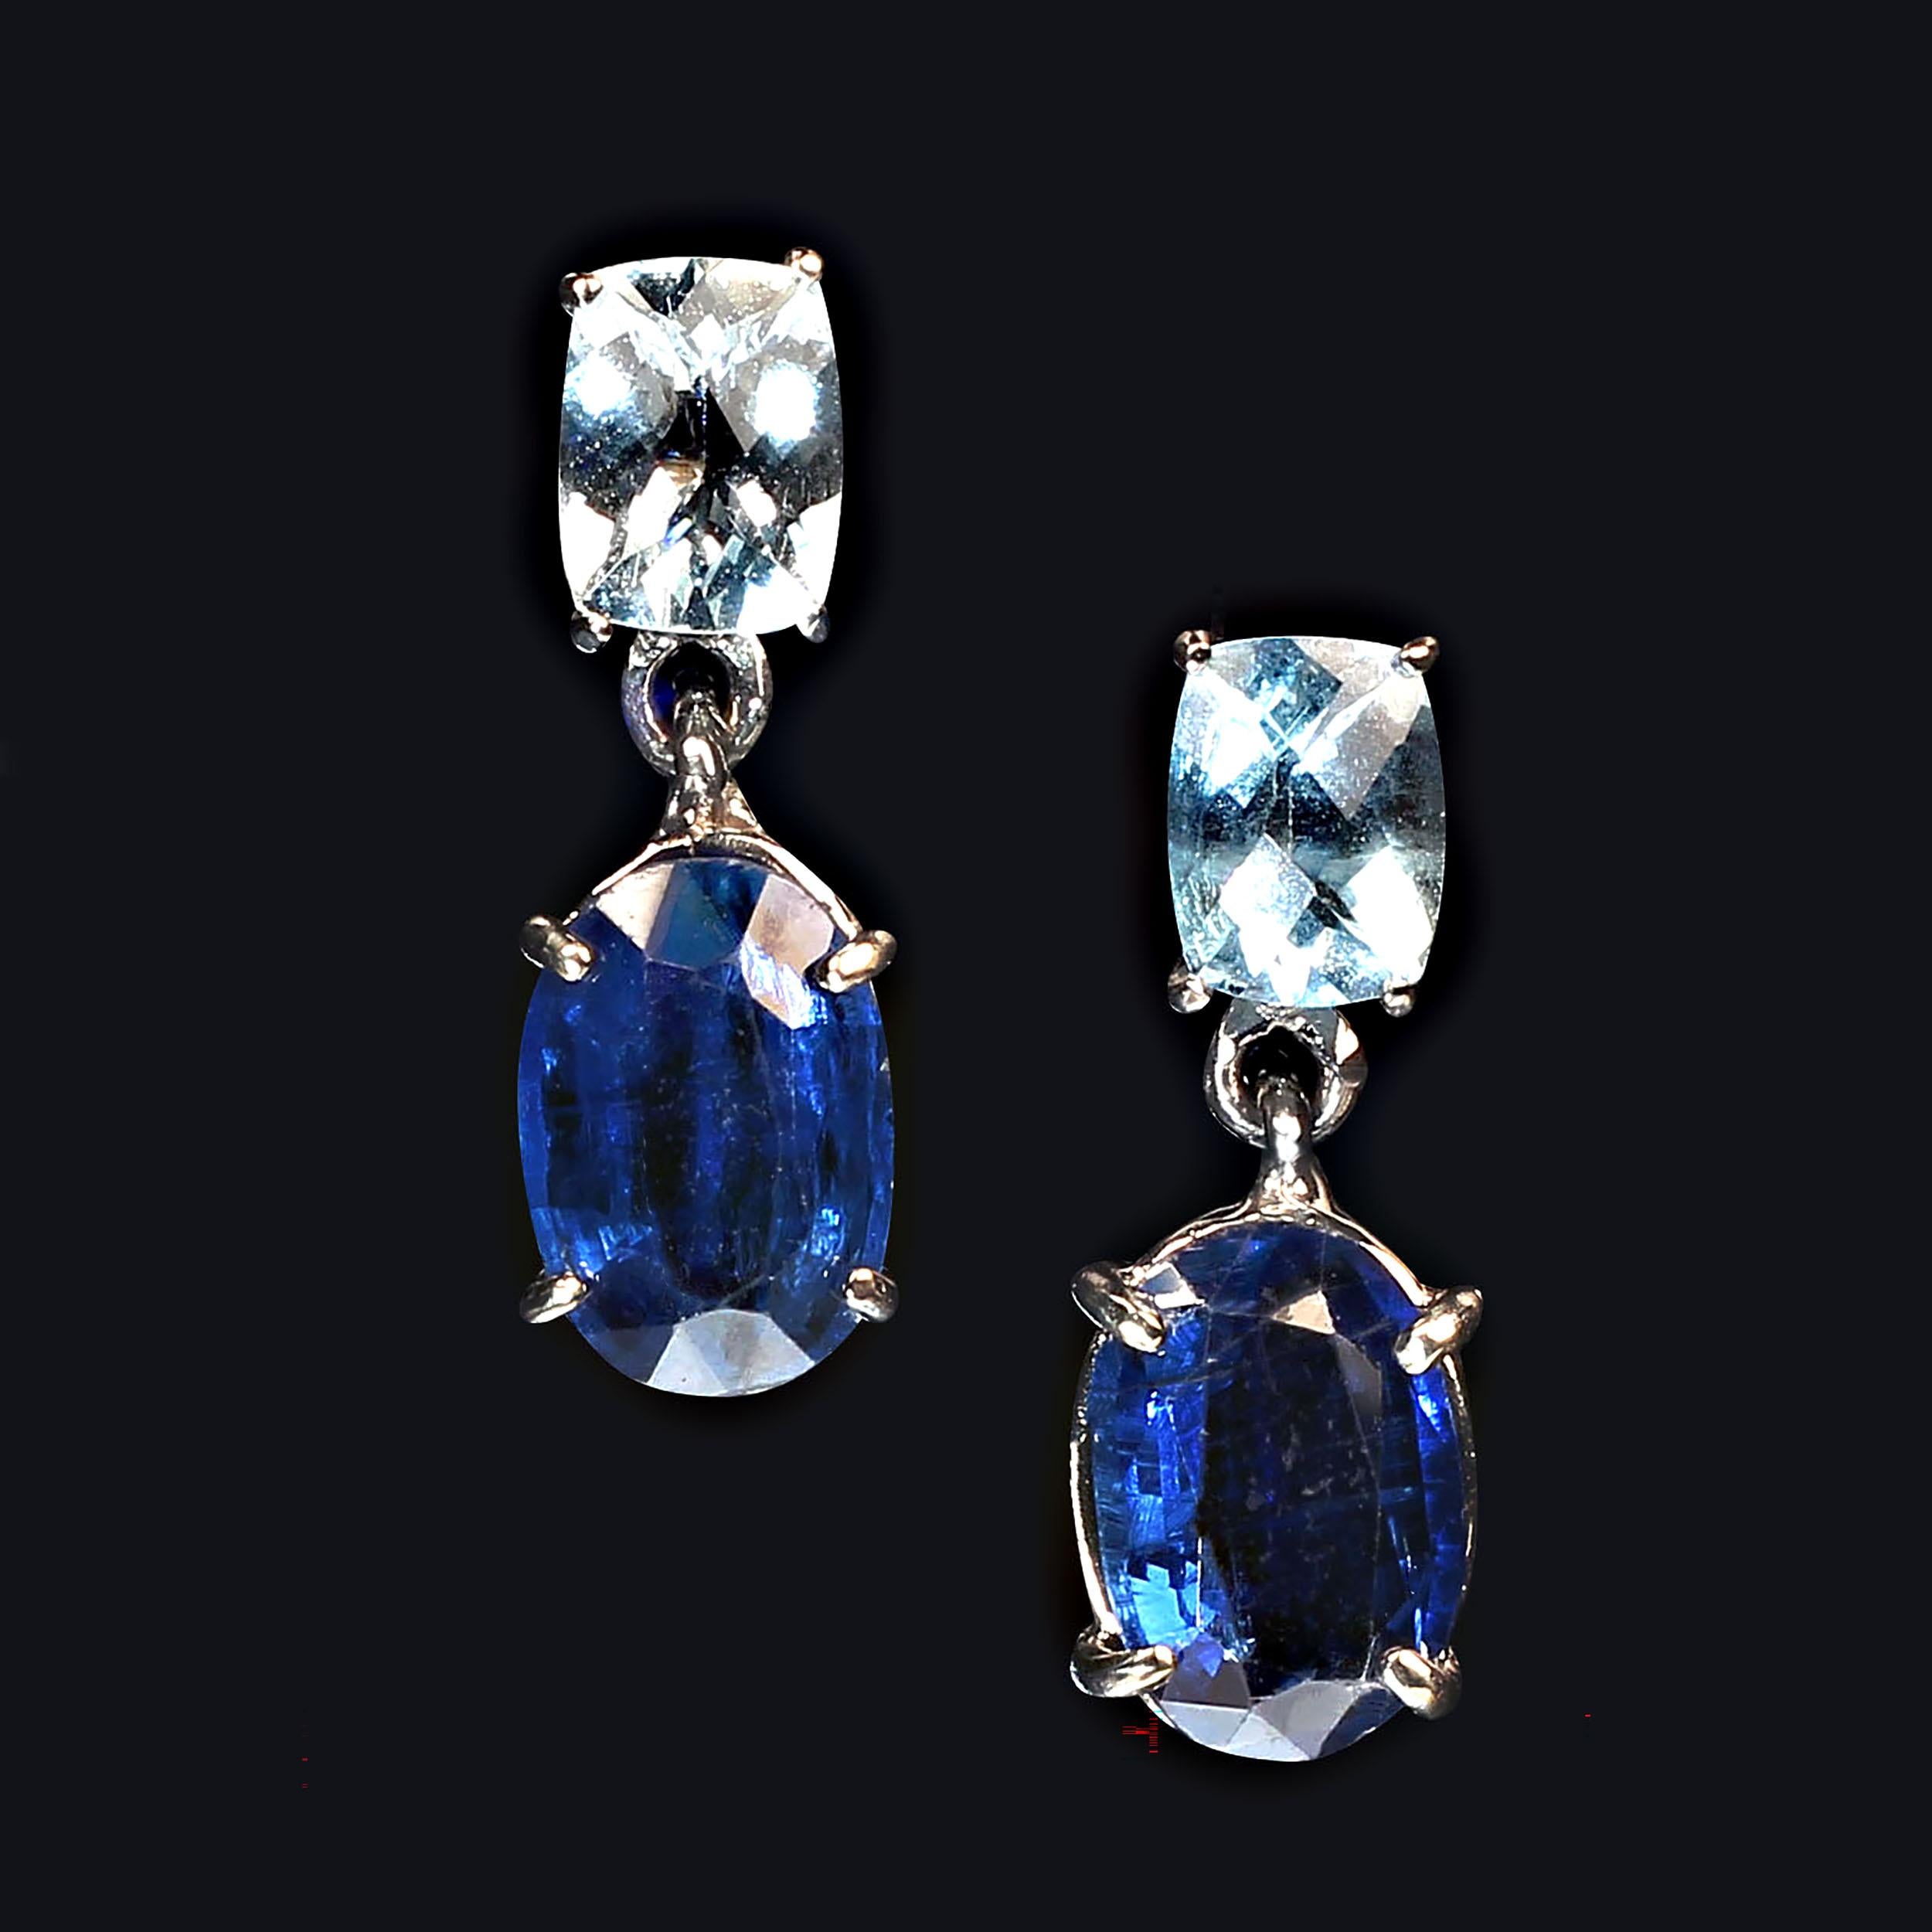 Artisan AJD Awesome Aquamarine Ovals and Blue Kyanite in 14K White Gold Earrings For Sale